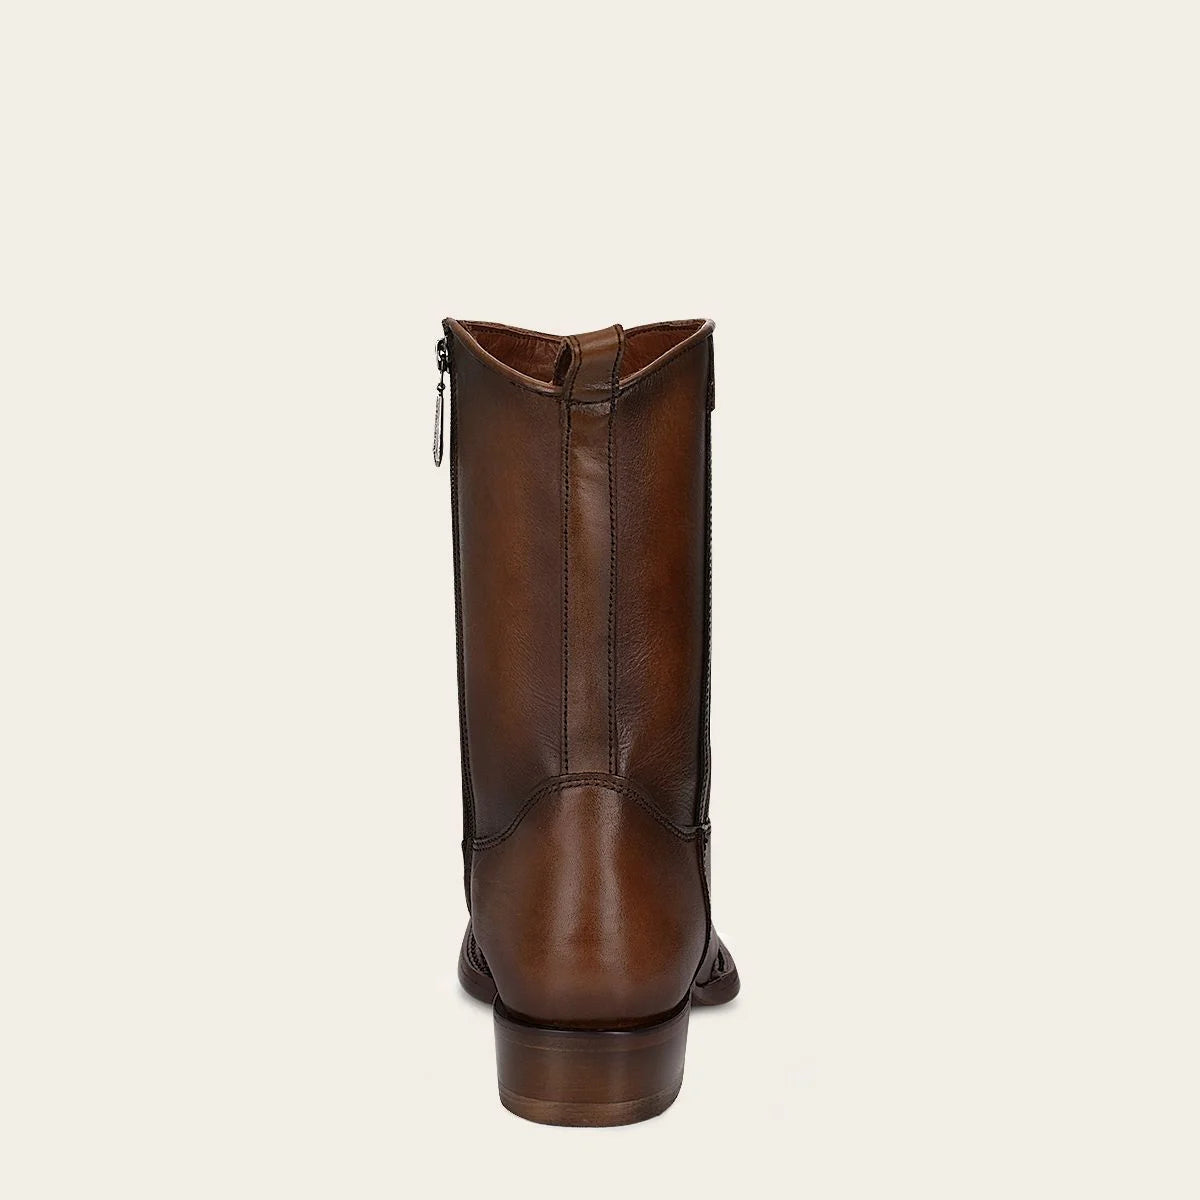 Cuadra brown exotic leather cowboy boots